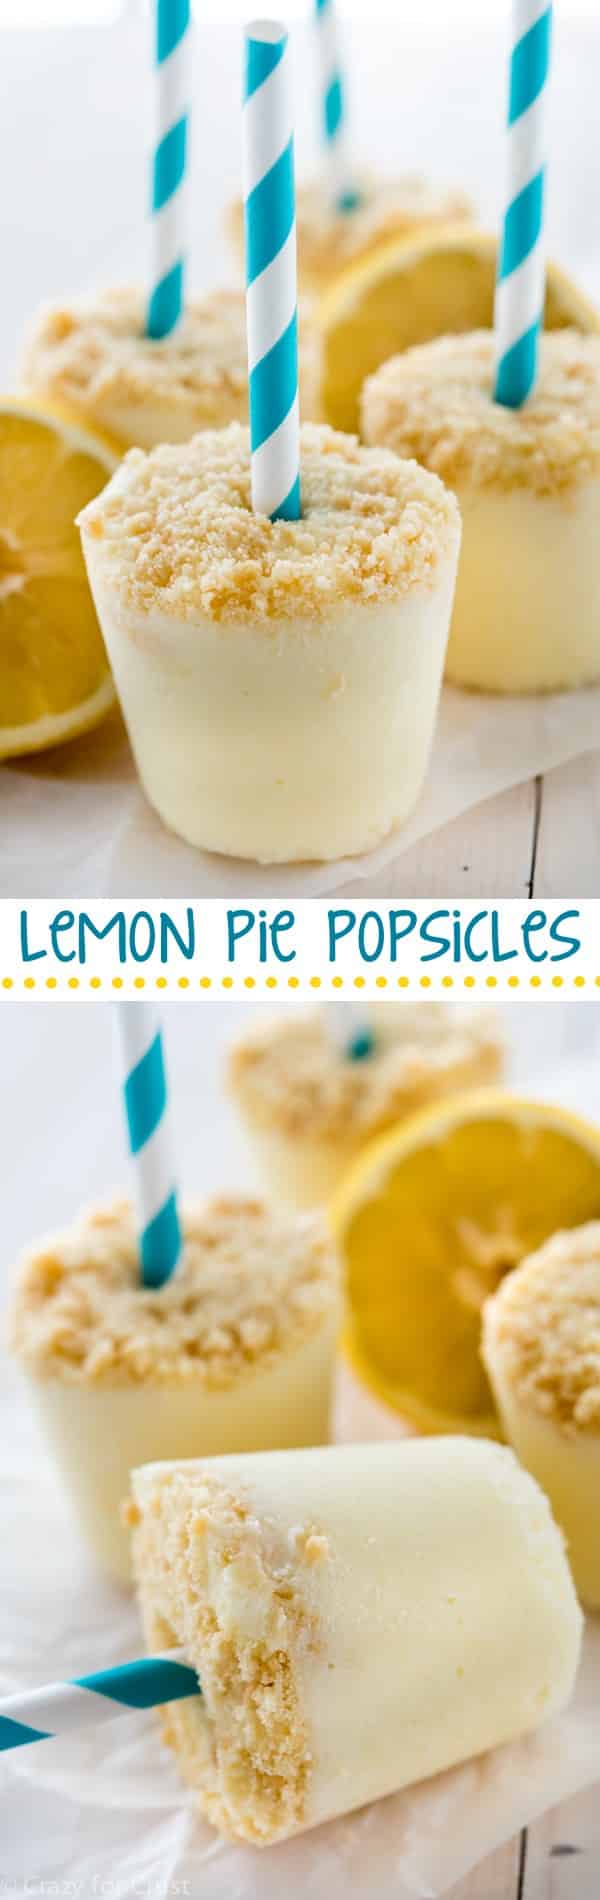 Lemon Pie Popsicles made with Greek yogurt! An easy recipe everyone will love for summer!